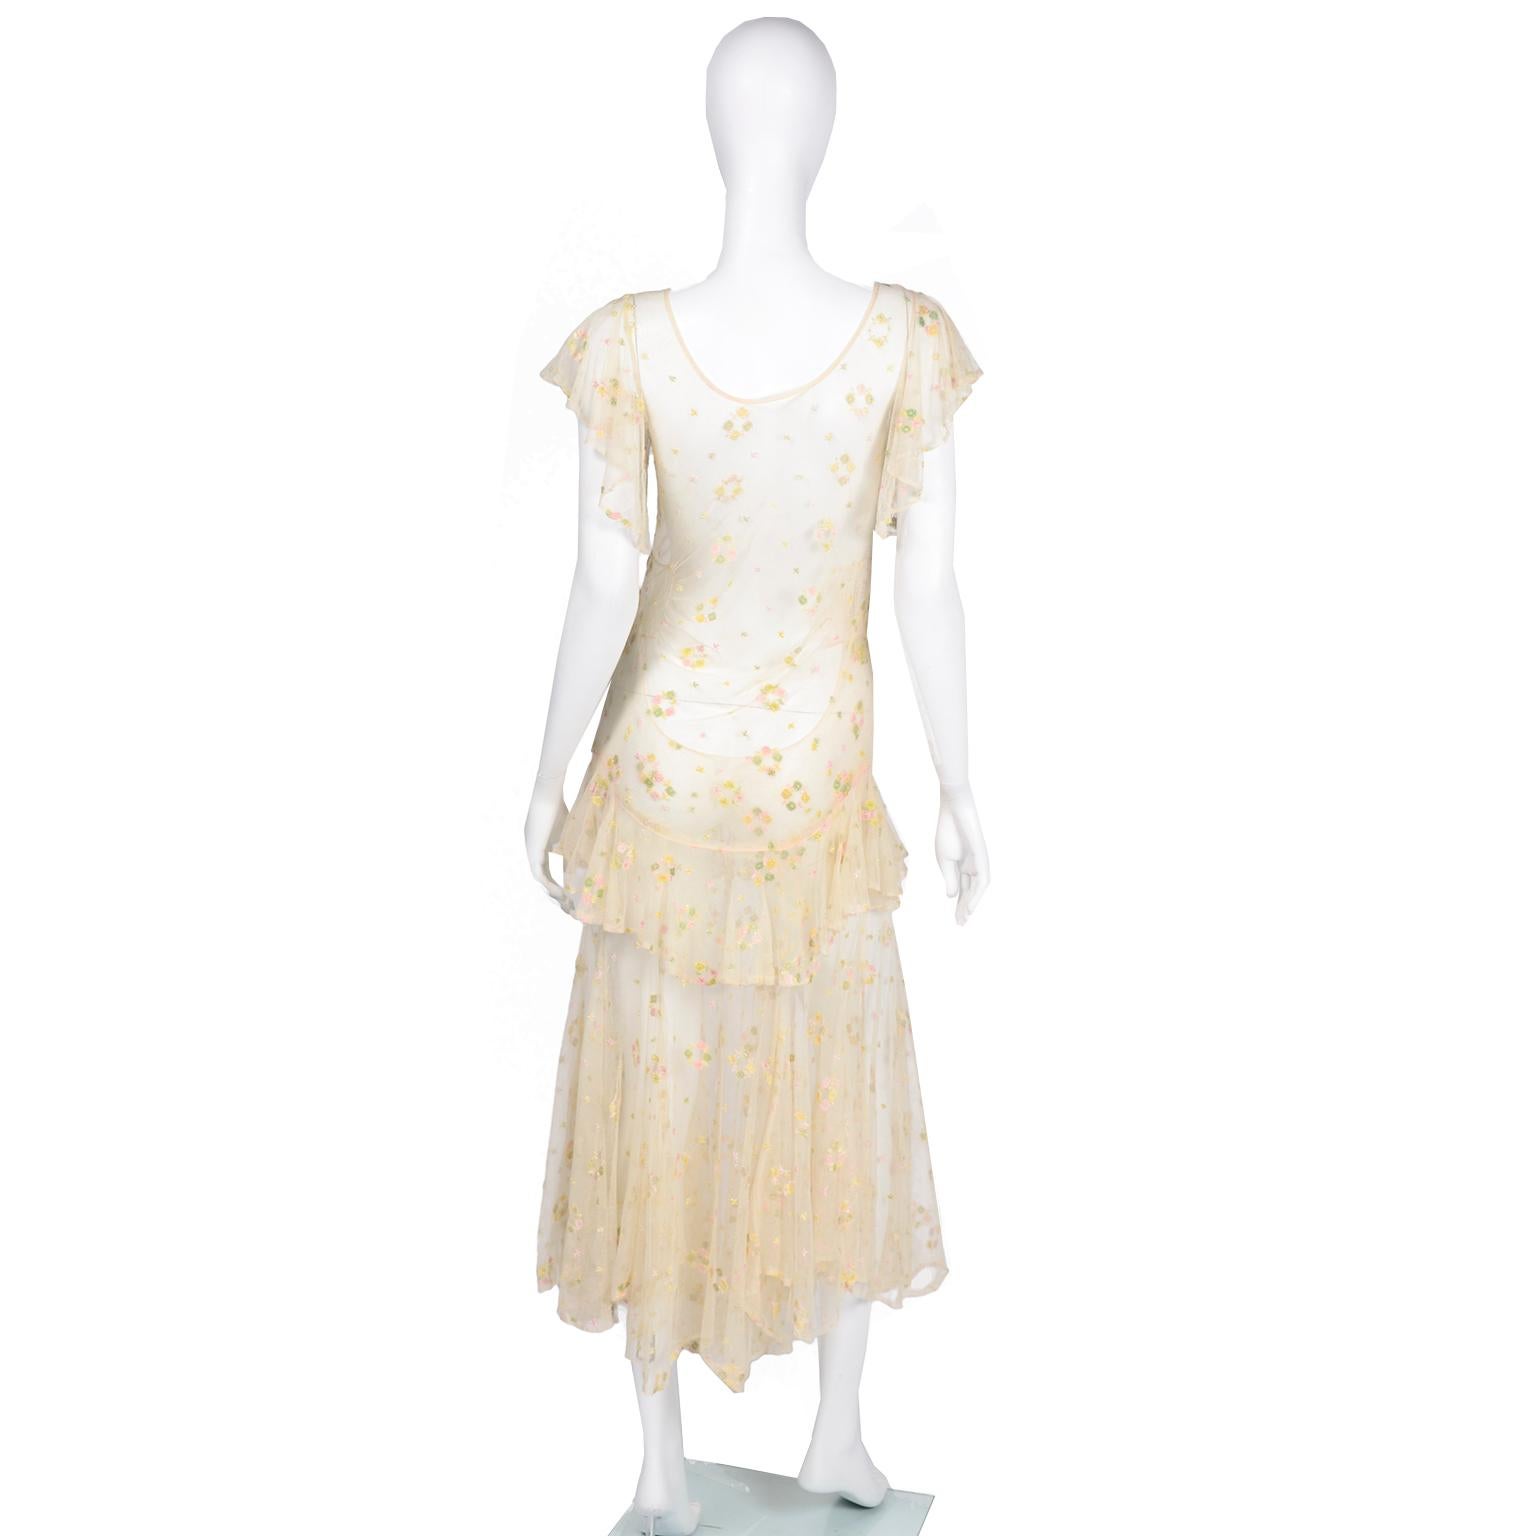 Beige 1930s Sheer Vintage Net Lace Dress w Butterfly Sleeves Embroidered w Flowers